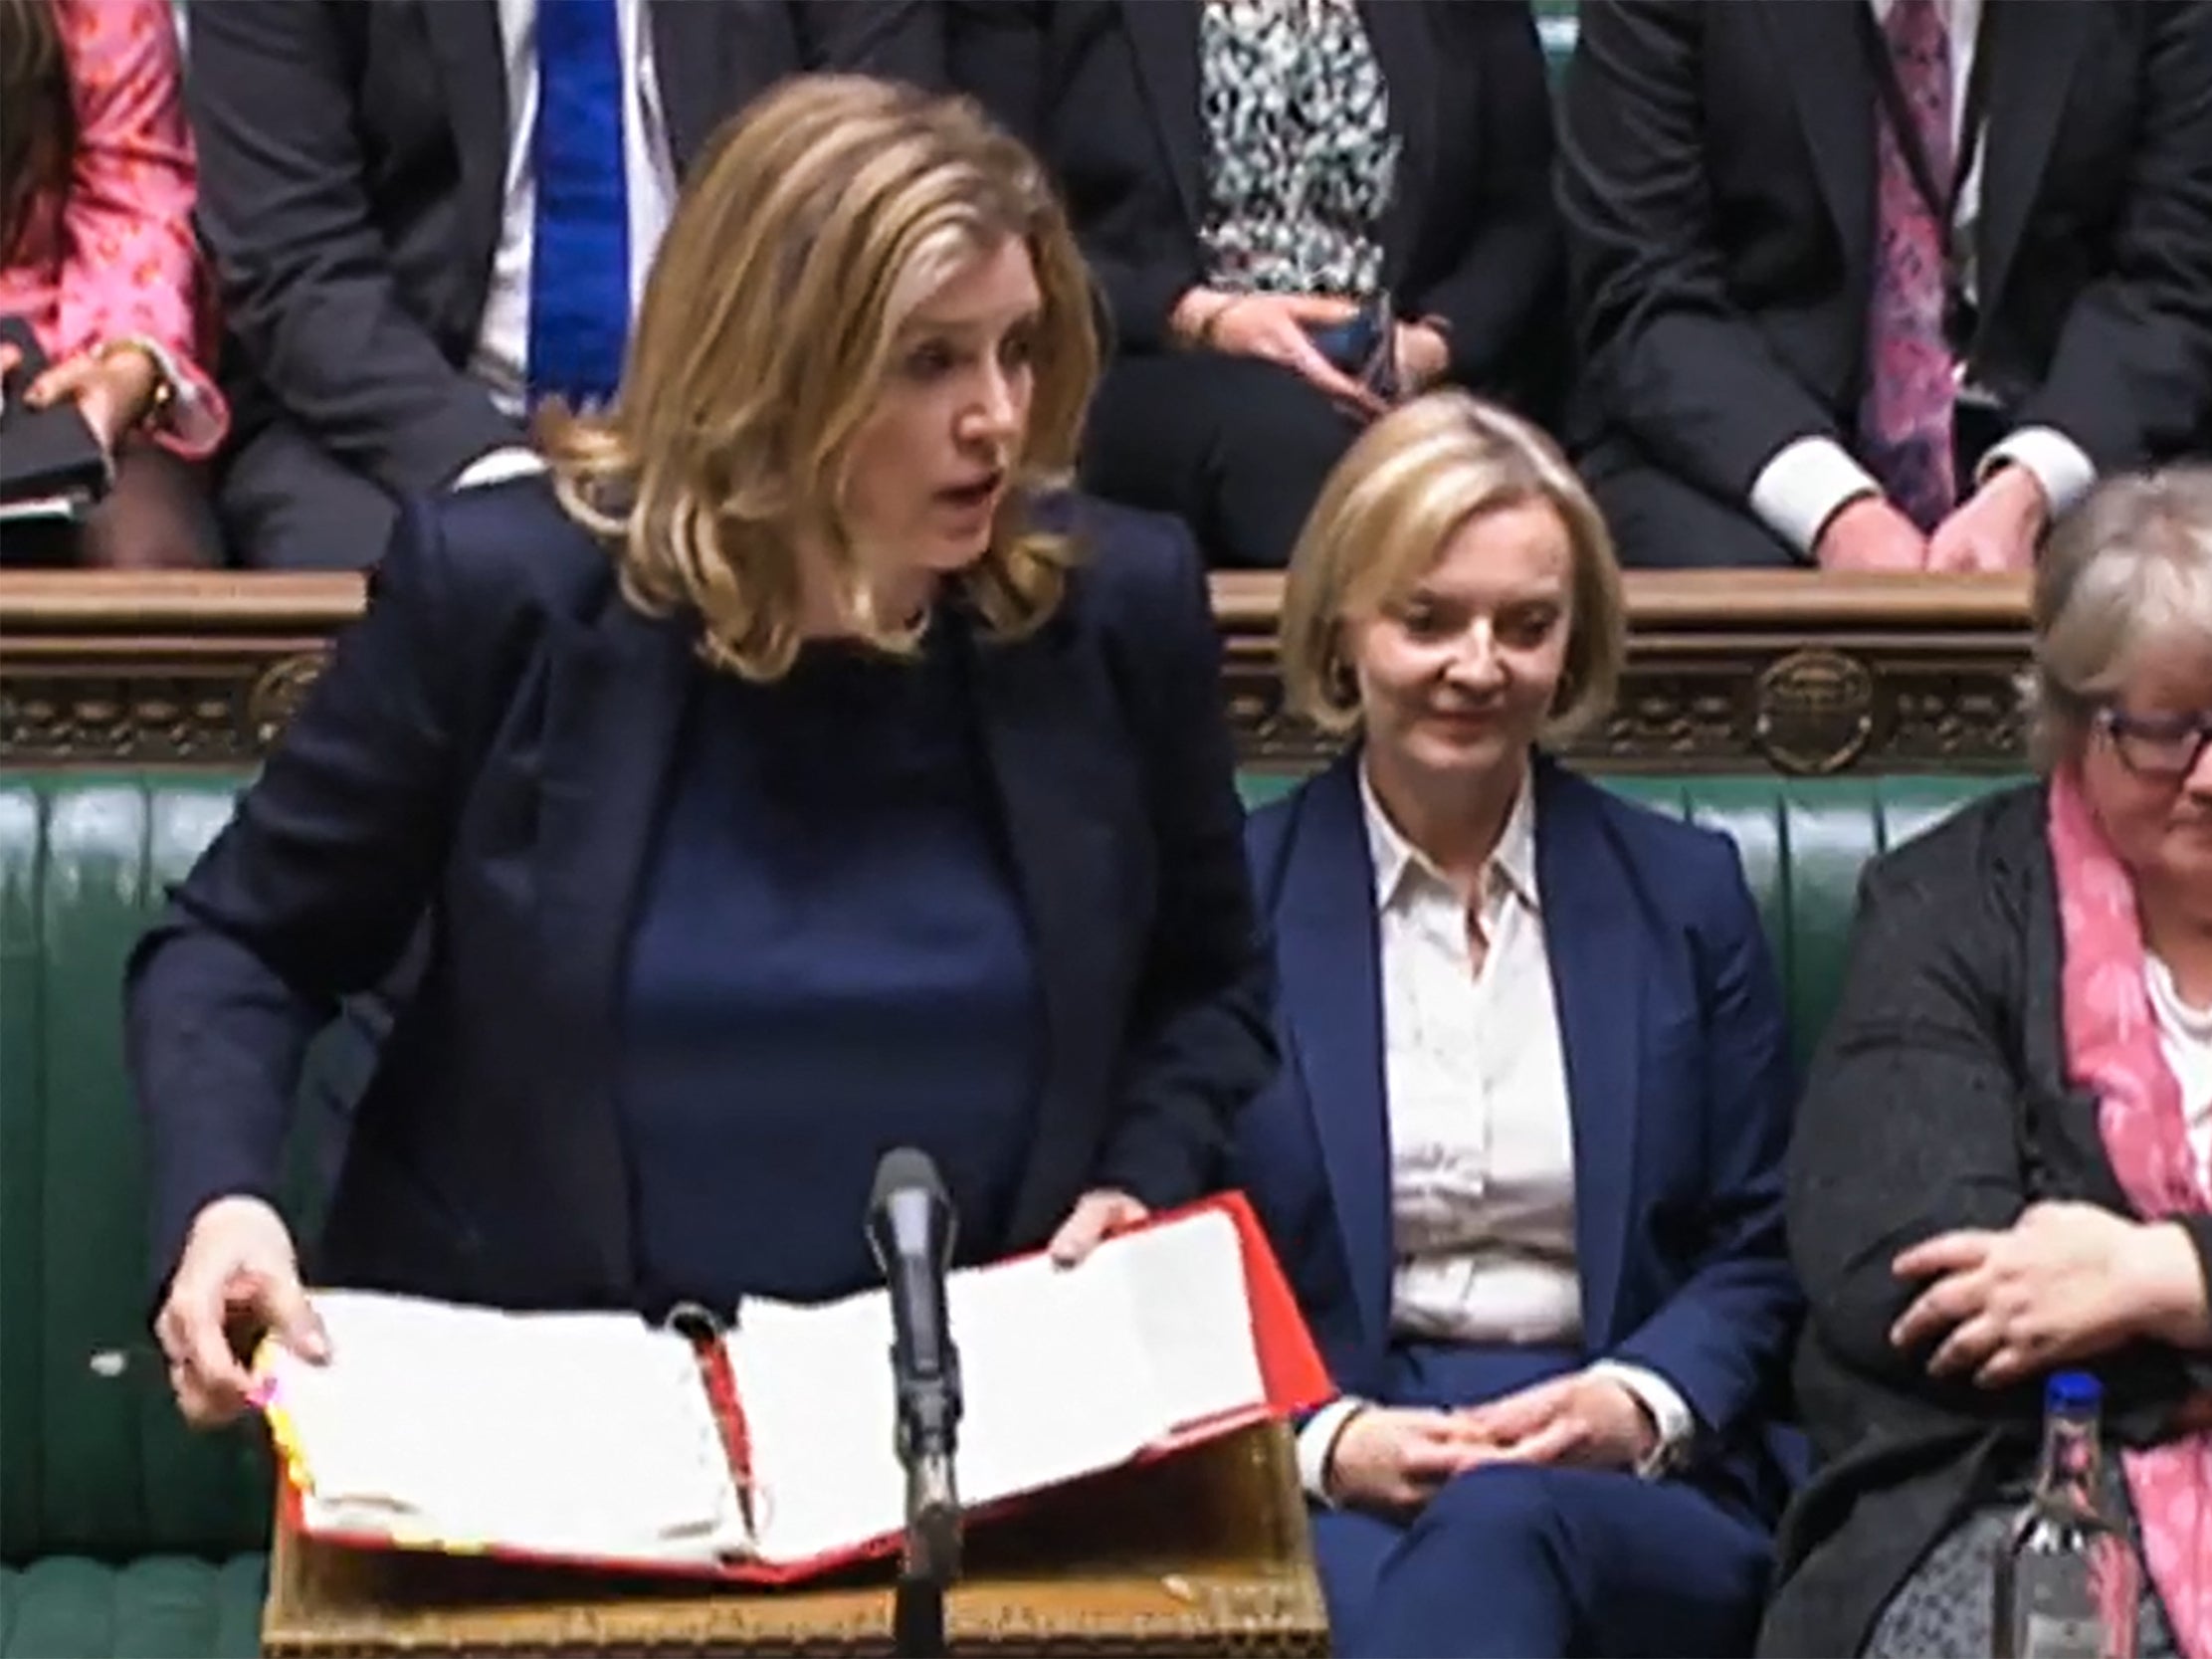 Penny Mordaunt covering for Liz Truss at the dispatch box in the House of Commons